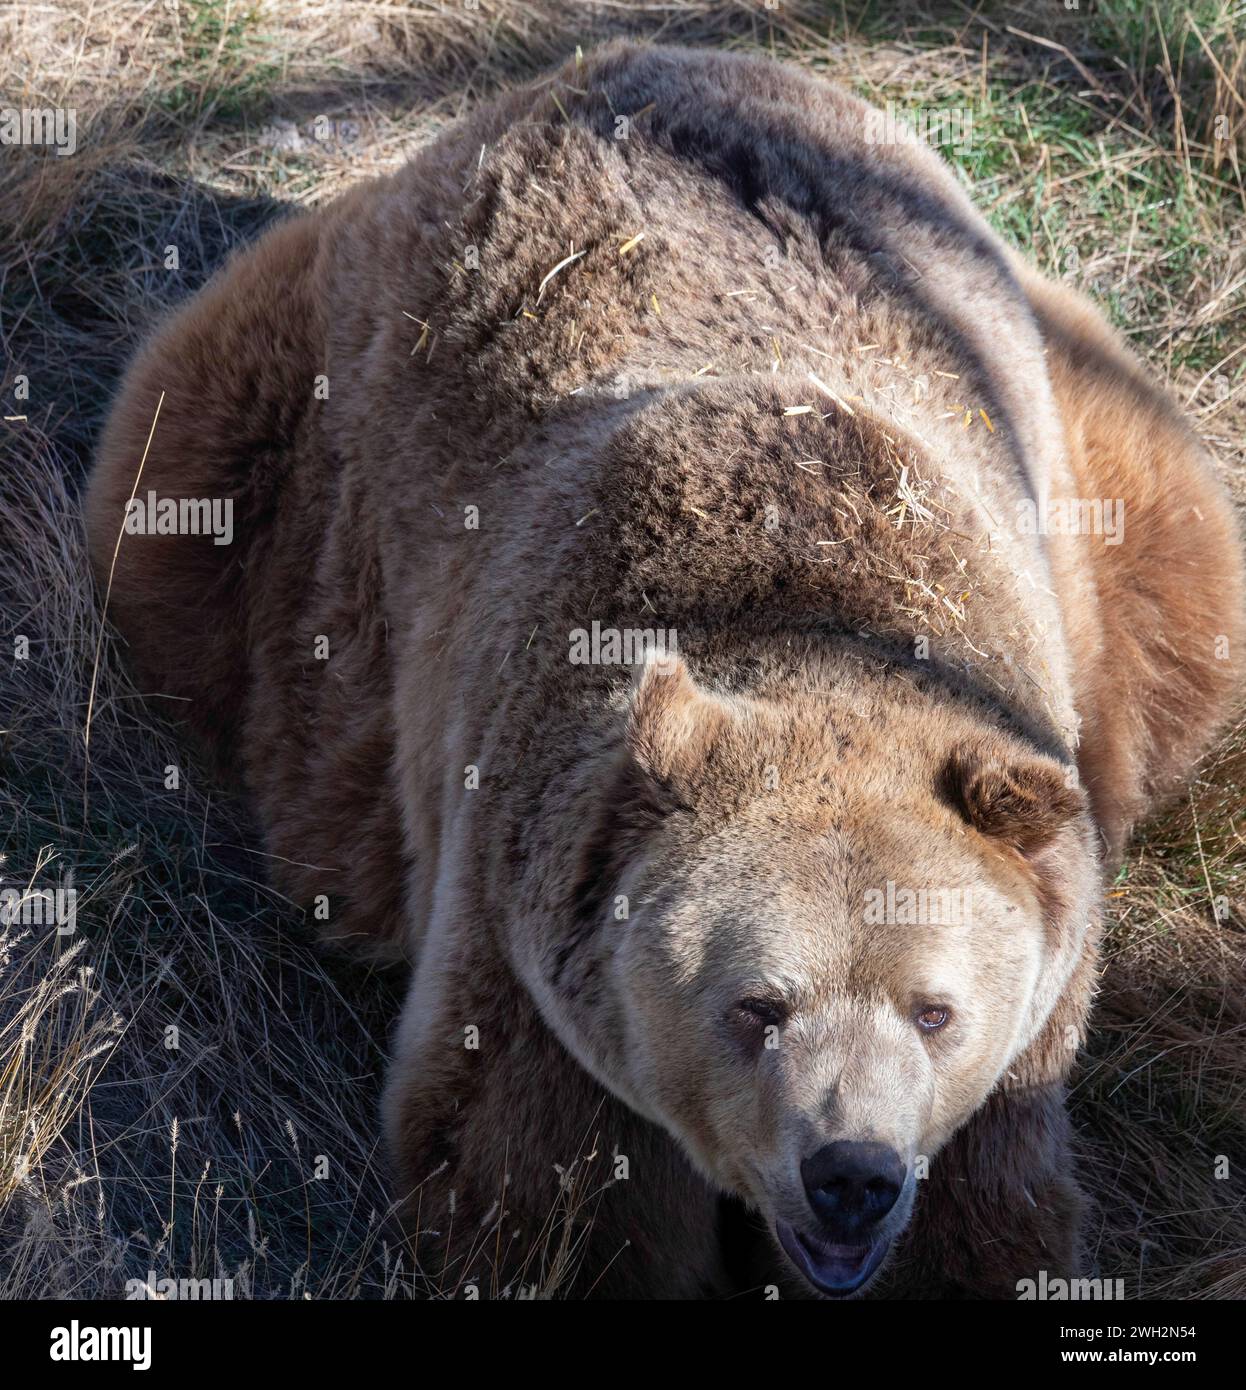 Keenesburg, Colorado - A grizzly bear (Ursus arctos horribilis) at the Wild Animal Sanctuary, a nonprofit that rescues animals that have been abused o Stock Photo